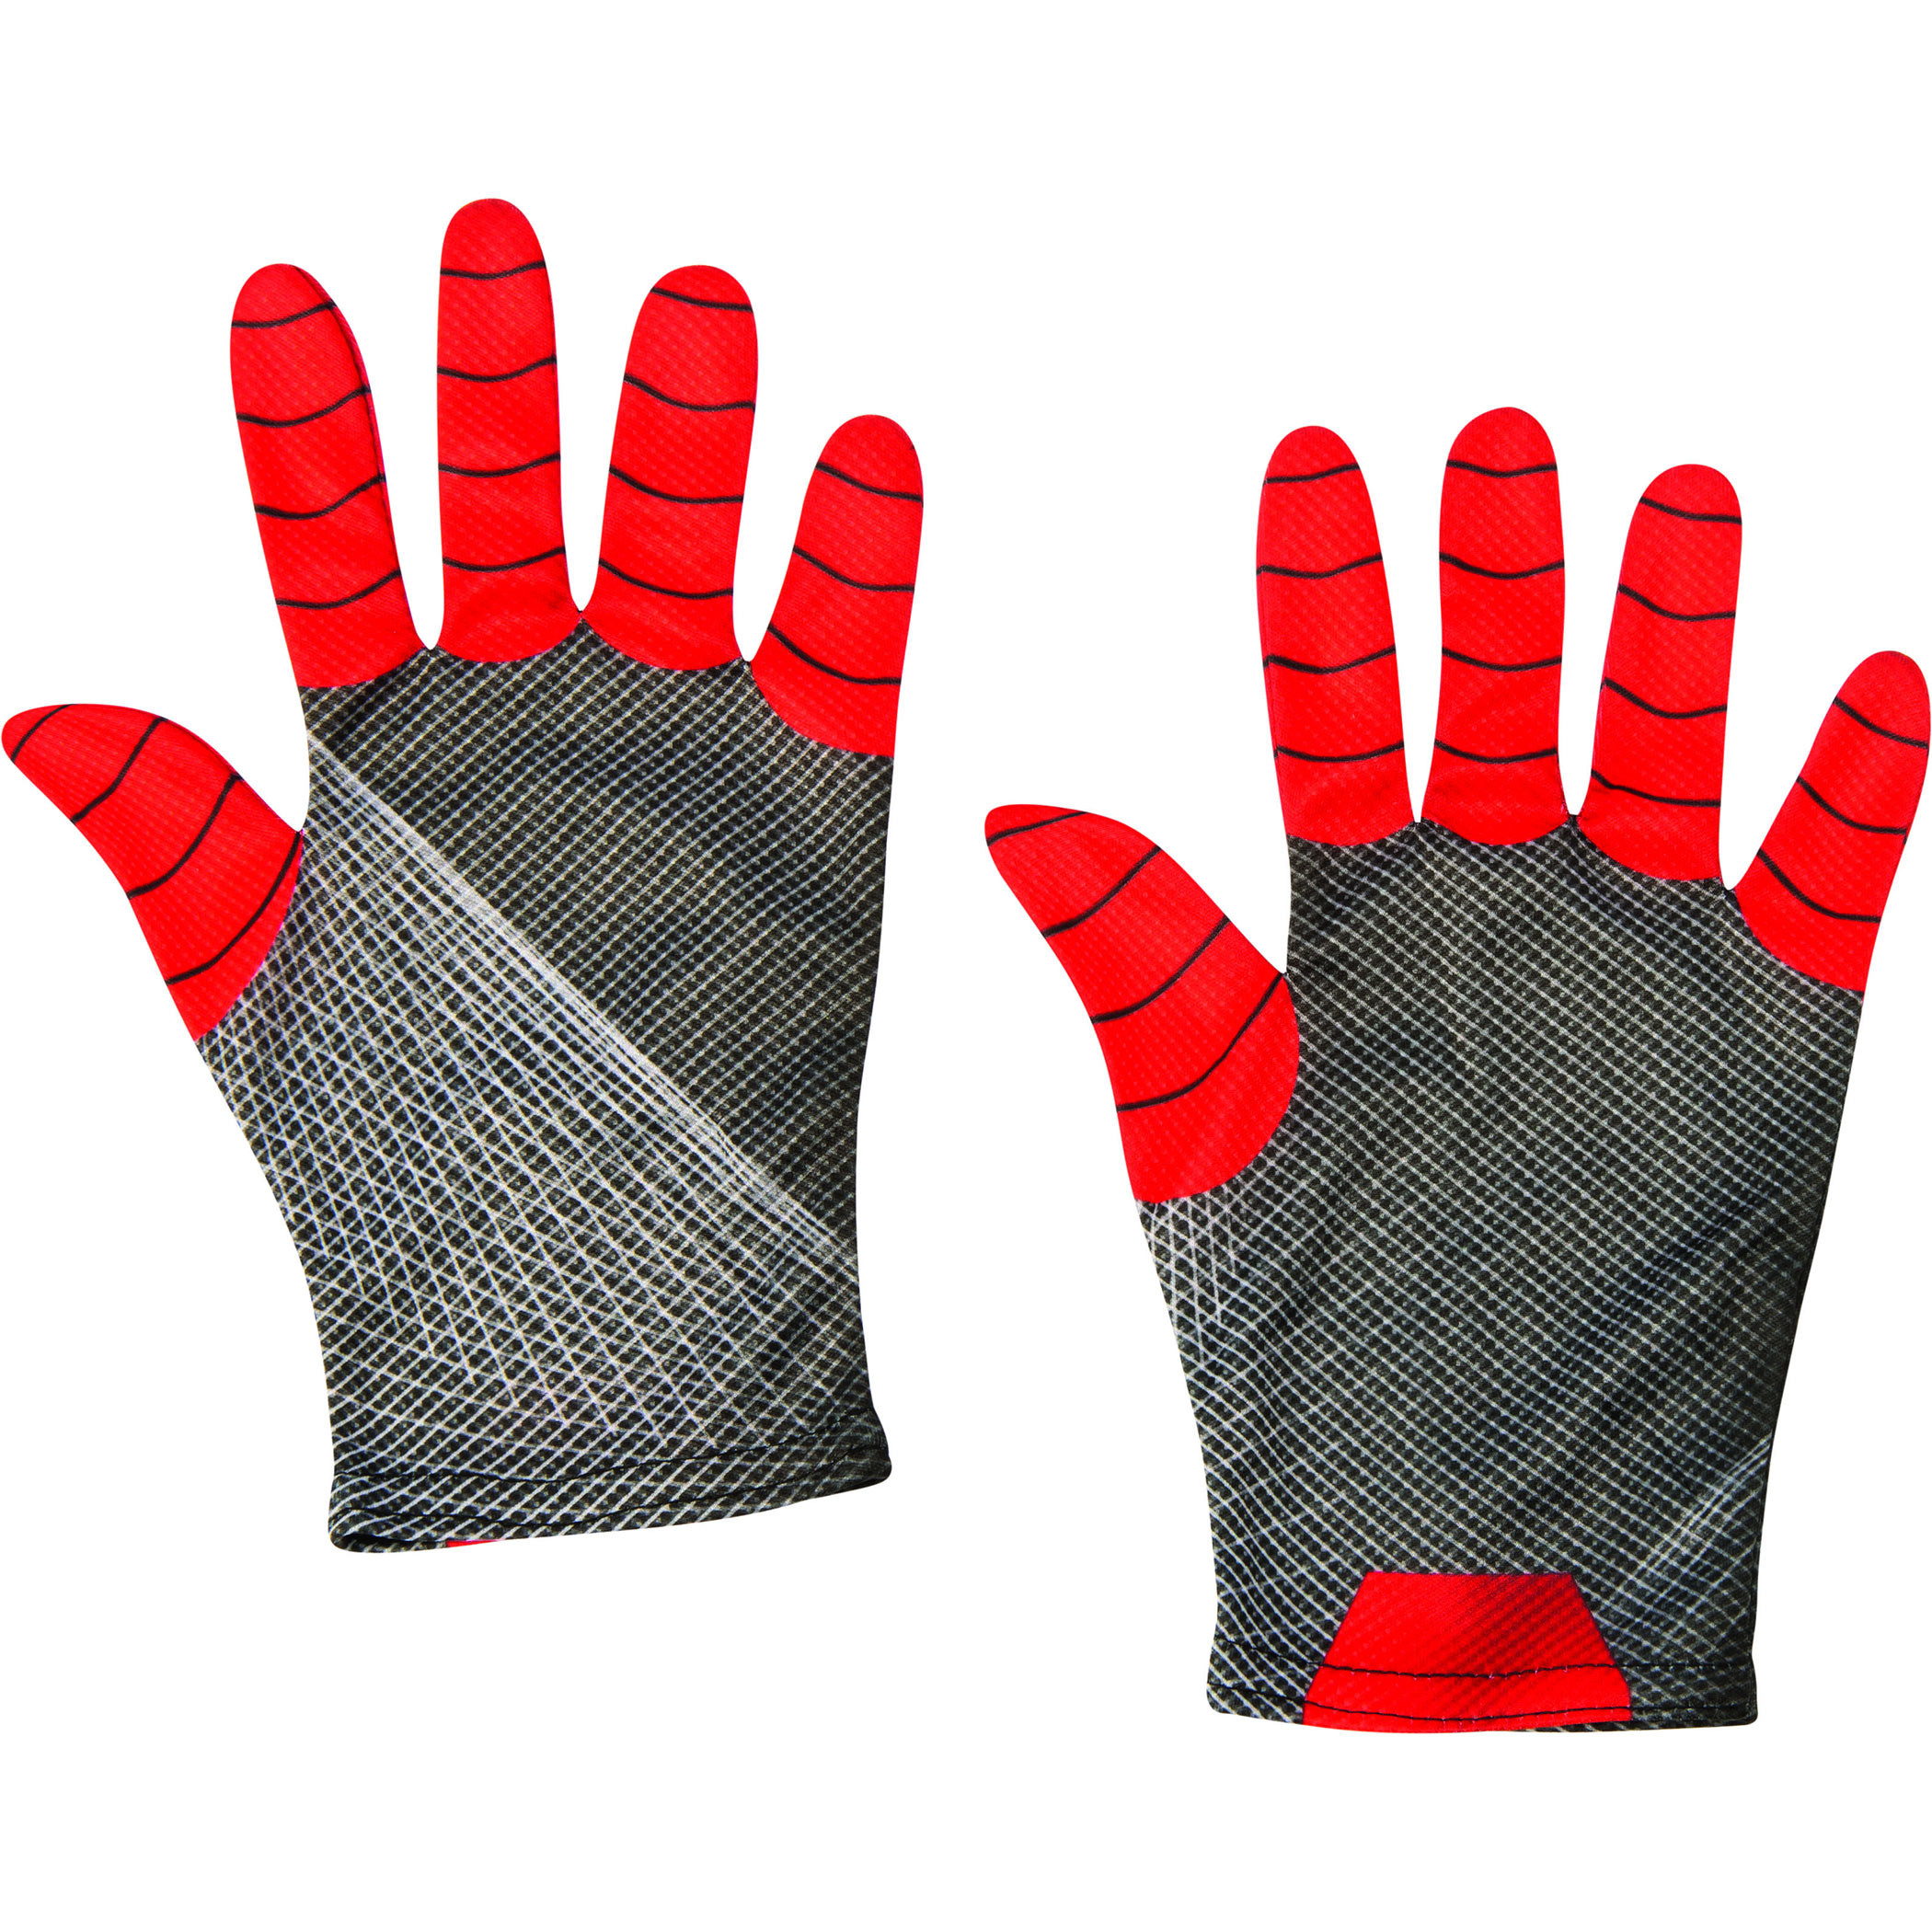 Spider-Man: Far From Home Red and Black Gloves